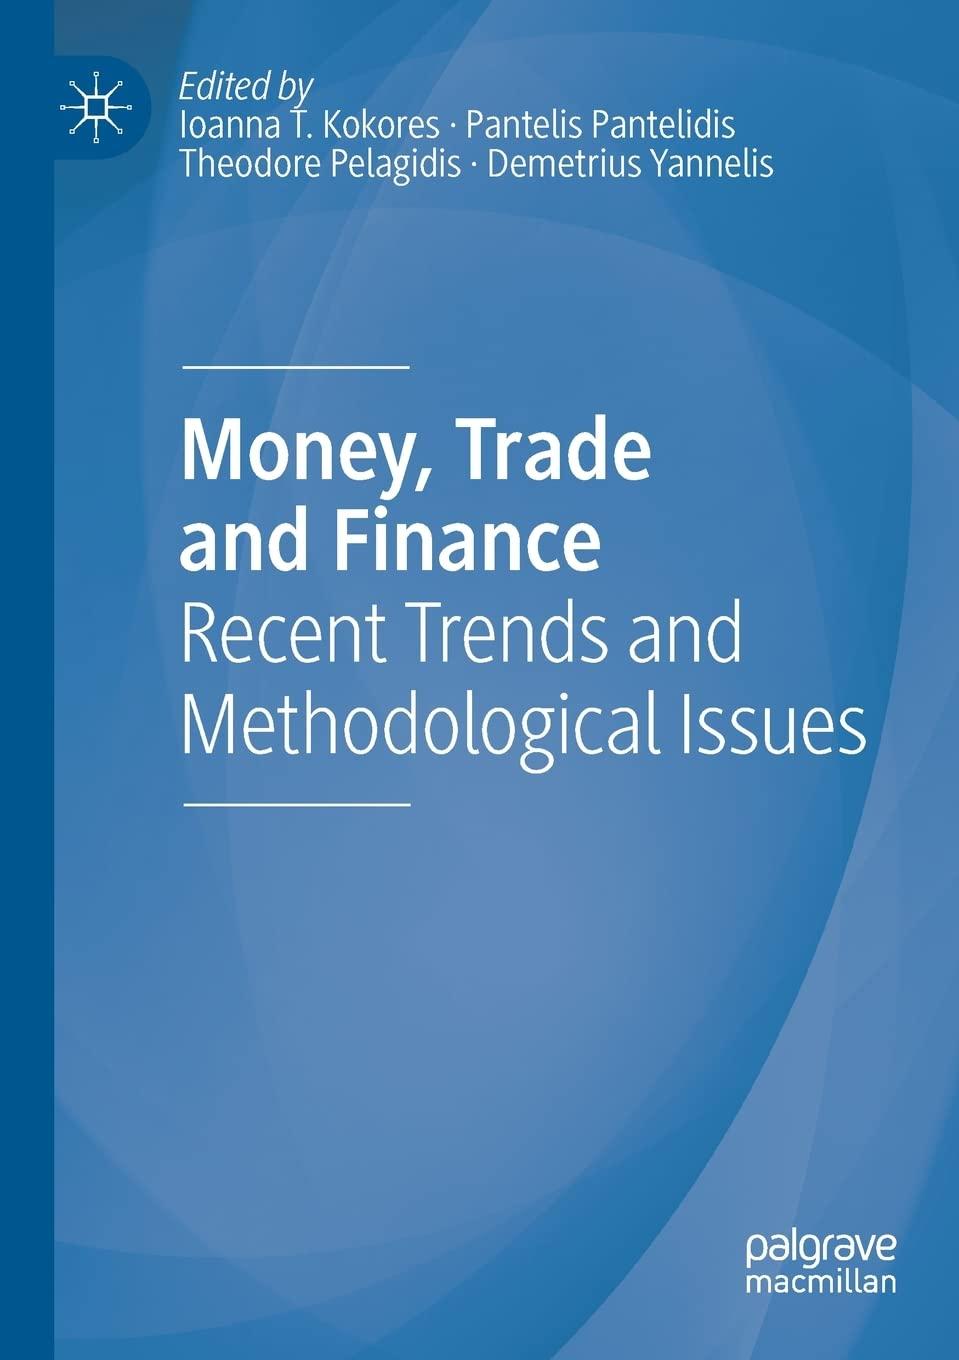 money trade and finance recent trends and methodological issues 1st edition ioanna t. kokores, pantelis